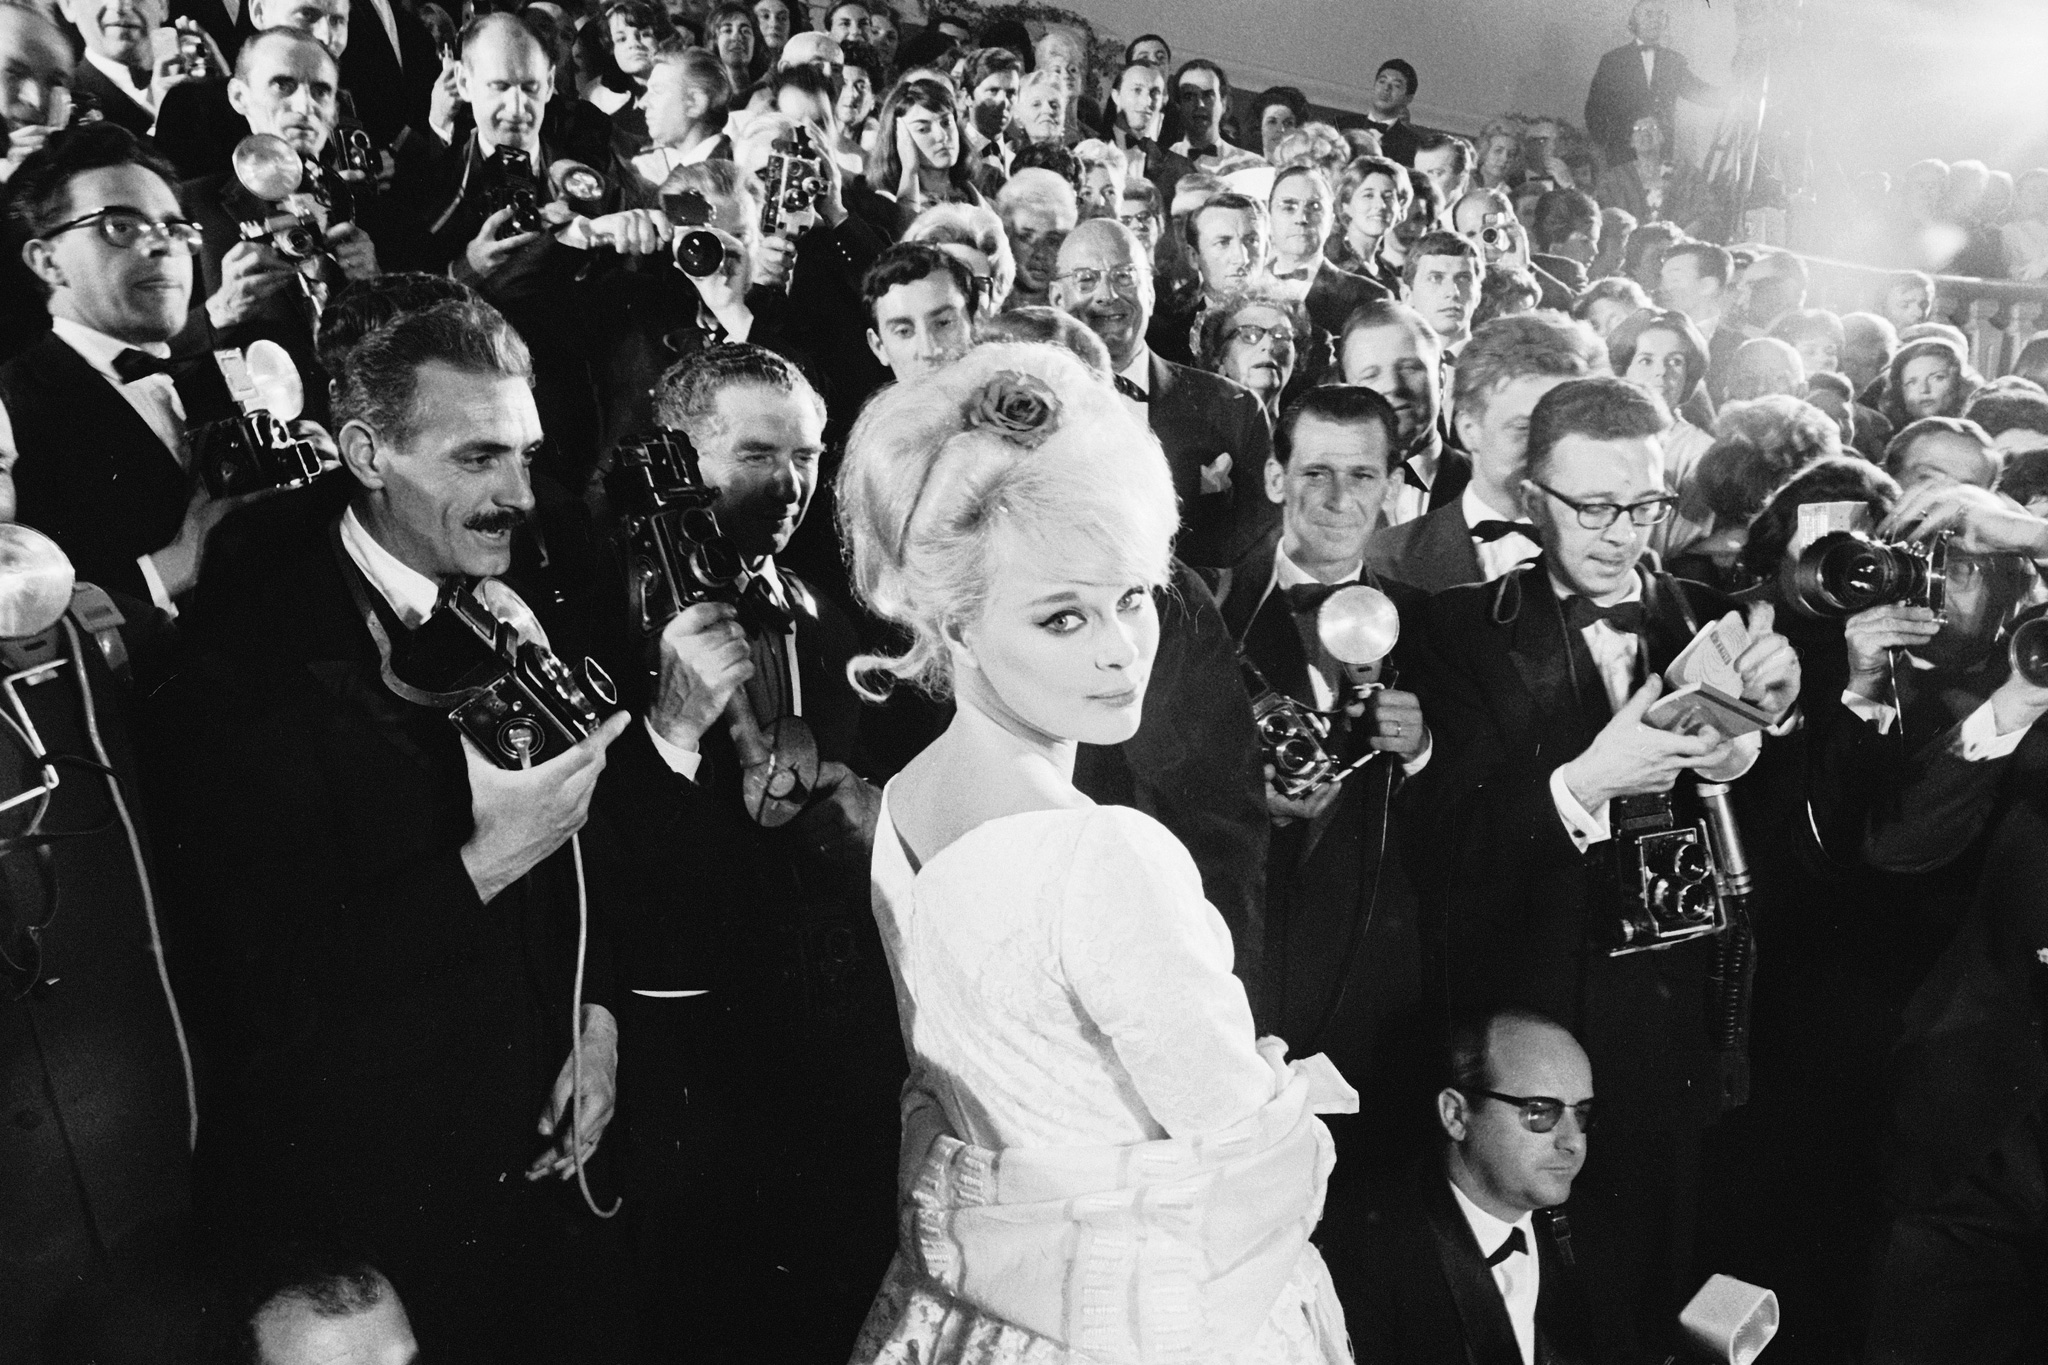 Actress Elke Sommer attends the Cannes Film Festival amid a sea of photographers, May 1962.